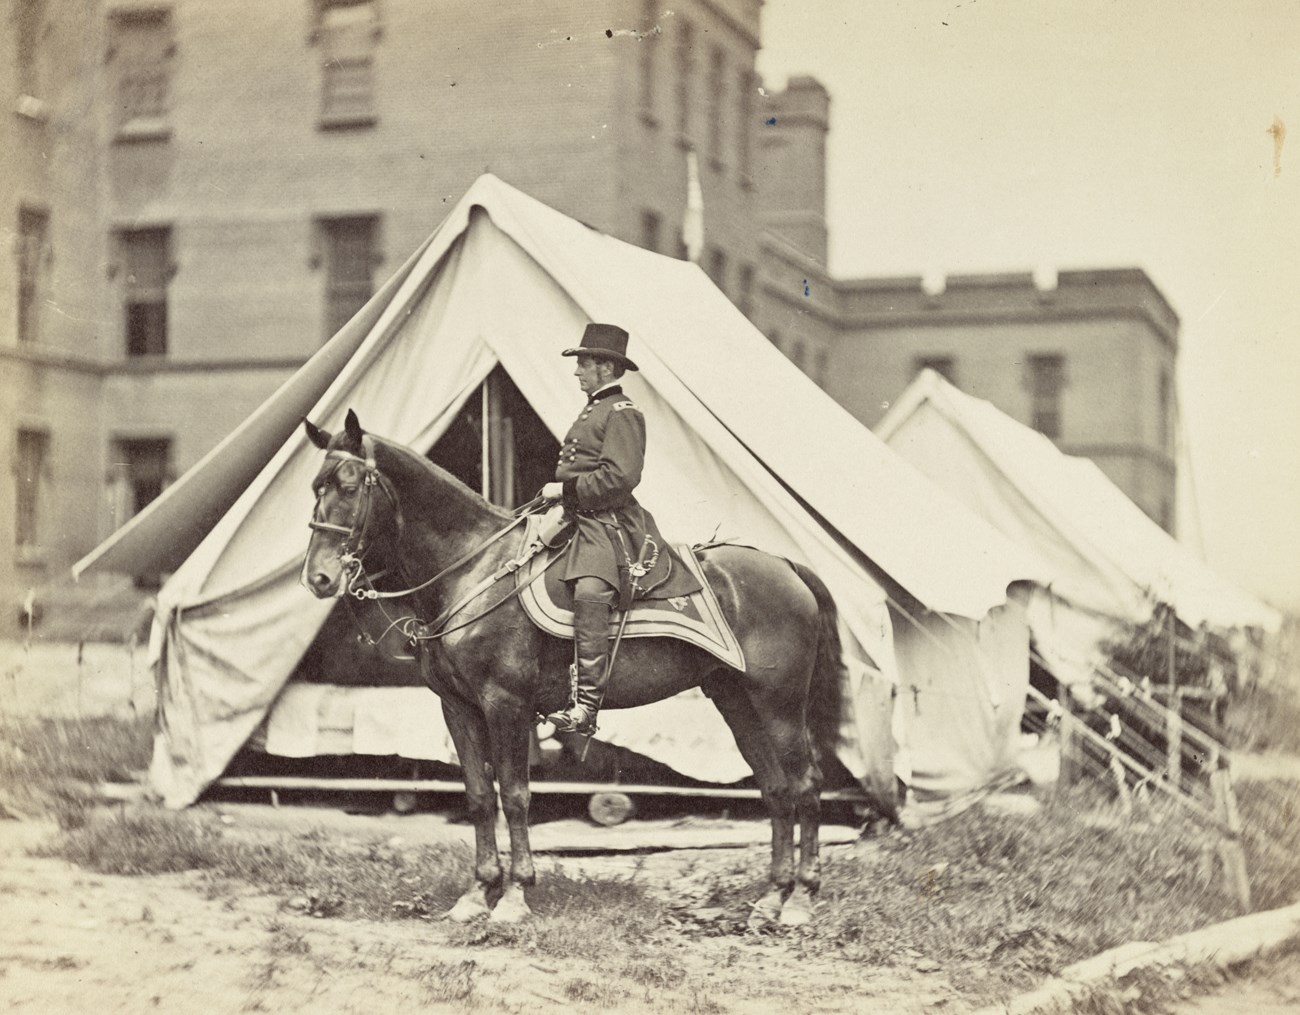 US Civil War military General Hooker on horseback in front of army tents.